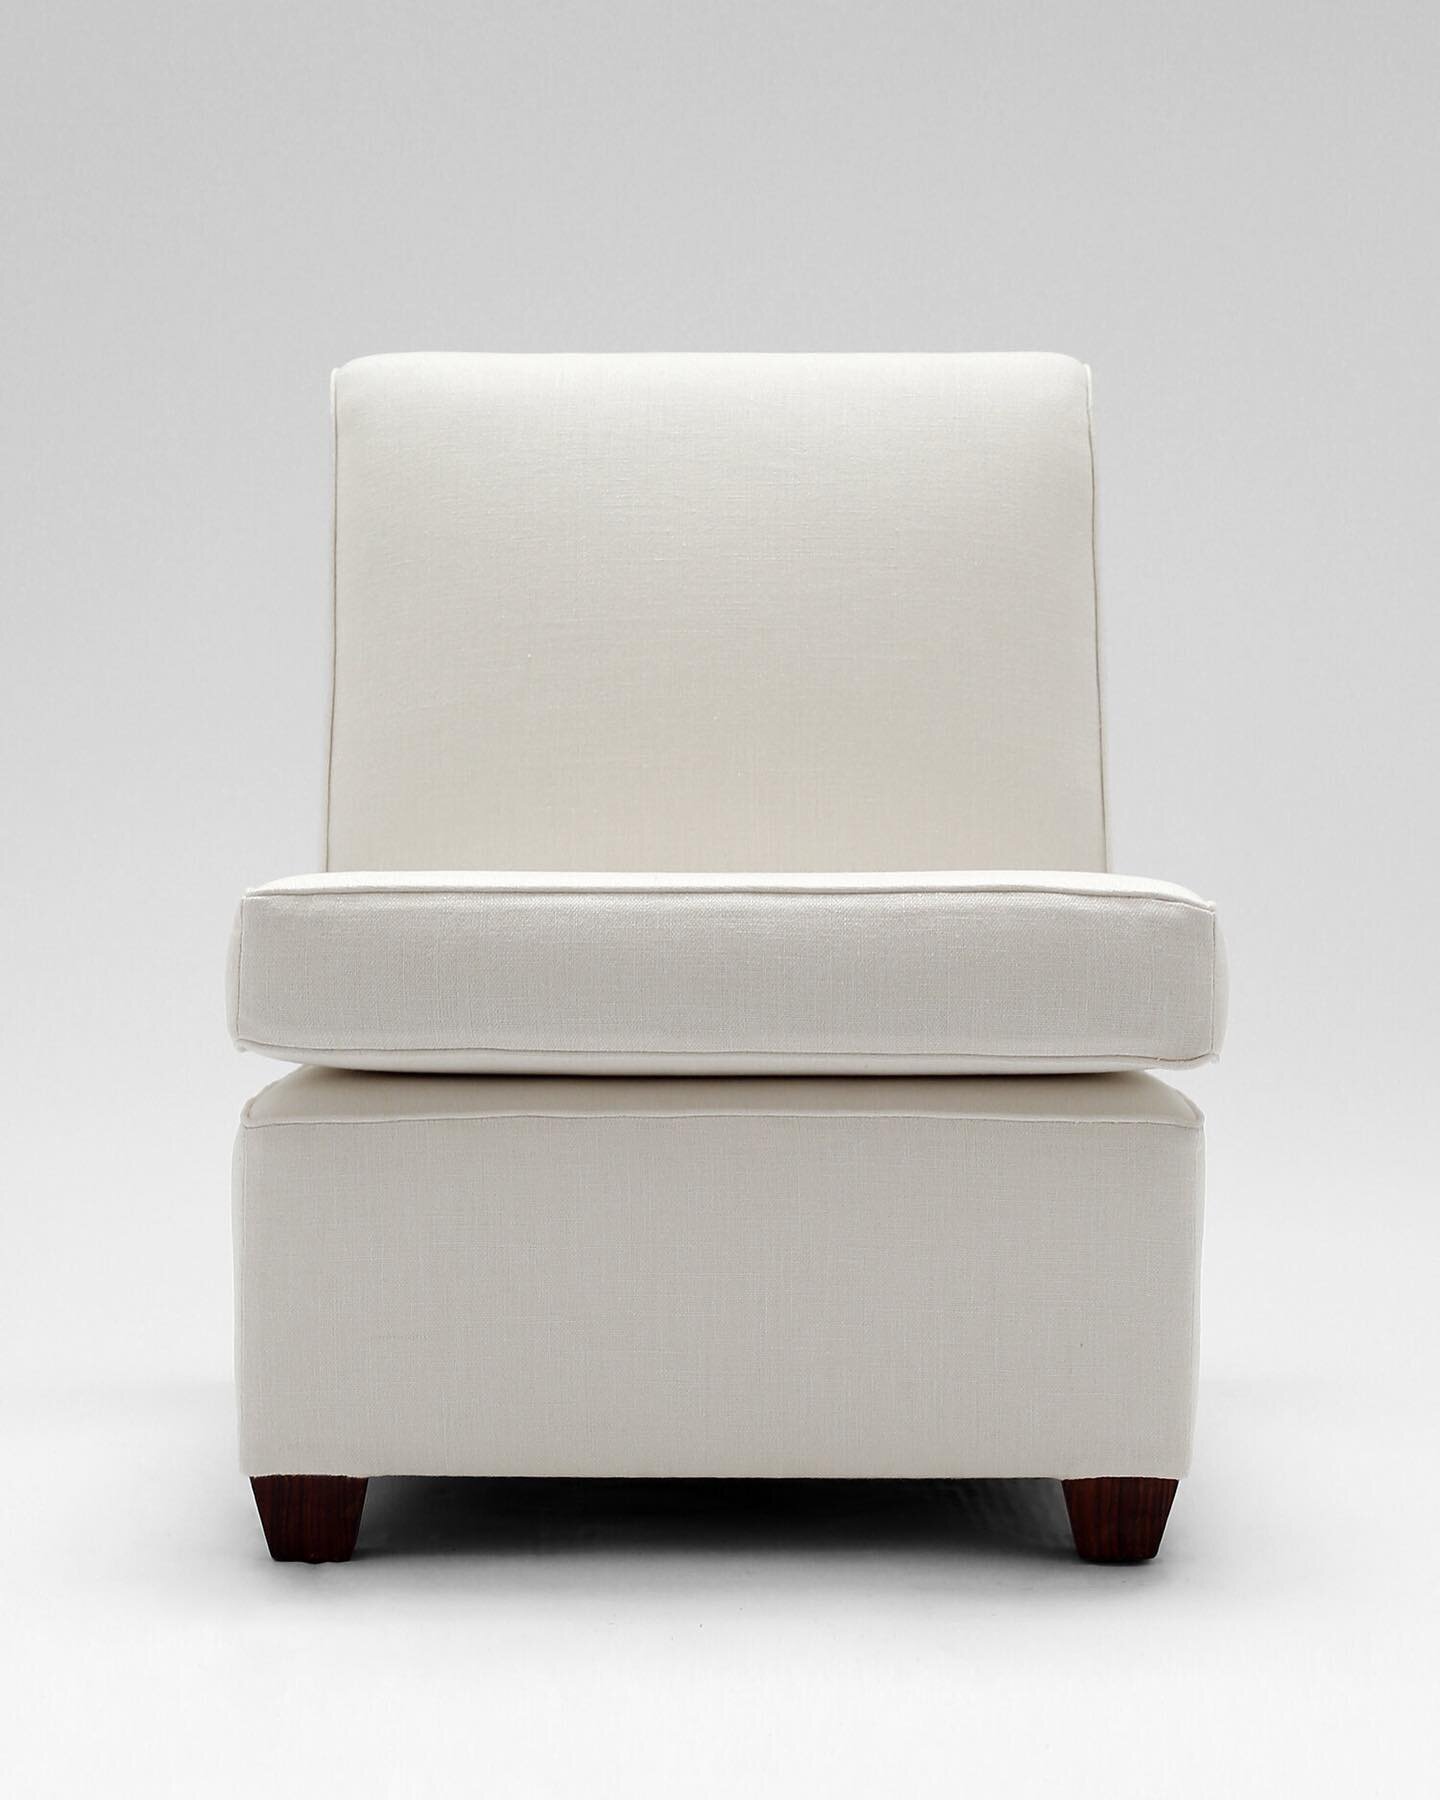 Perfect proportion - French white linen chauffeuse. Style from the 1940&rsquo;s and still current. 

.
.
.
.

#furniture #interiors #furnituredesign #decorate #decor #white #upholstery #style #proportion #scale #perspective #refined #elegant #sophist